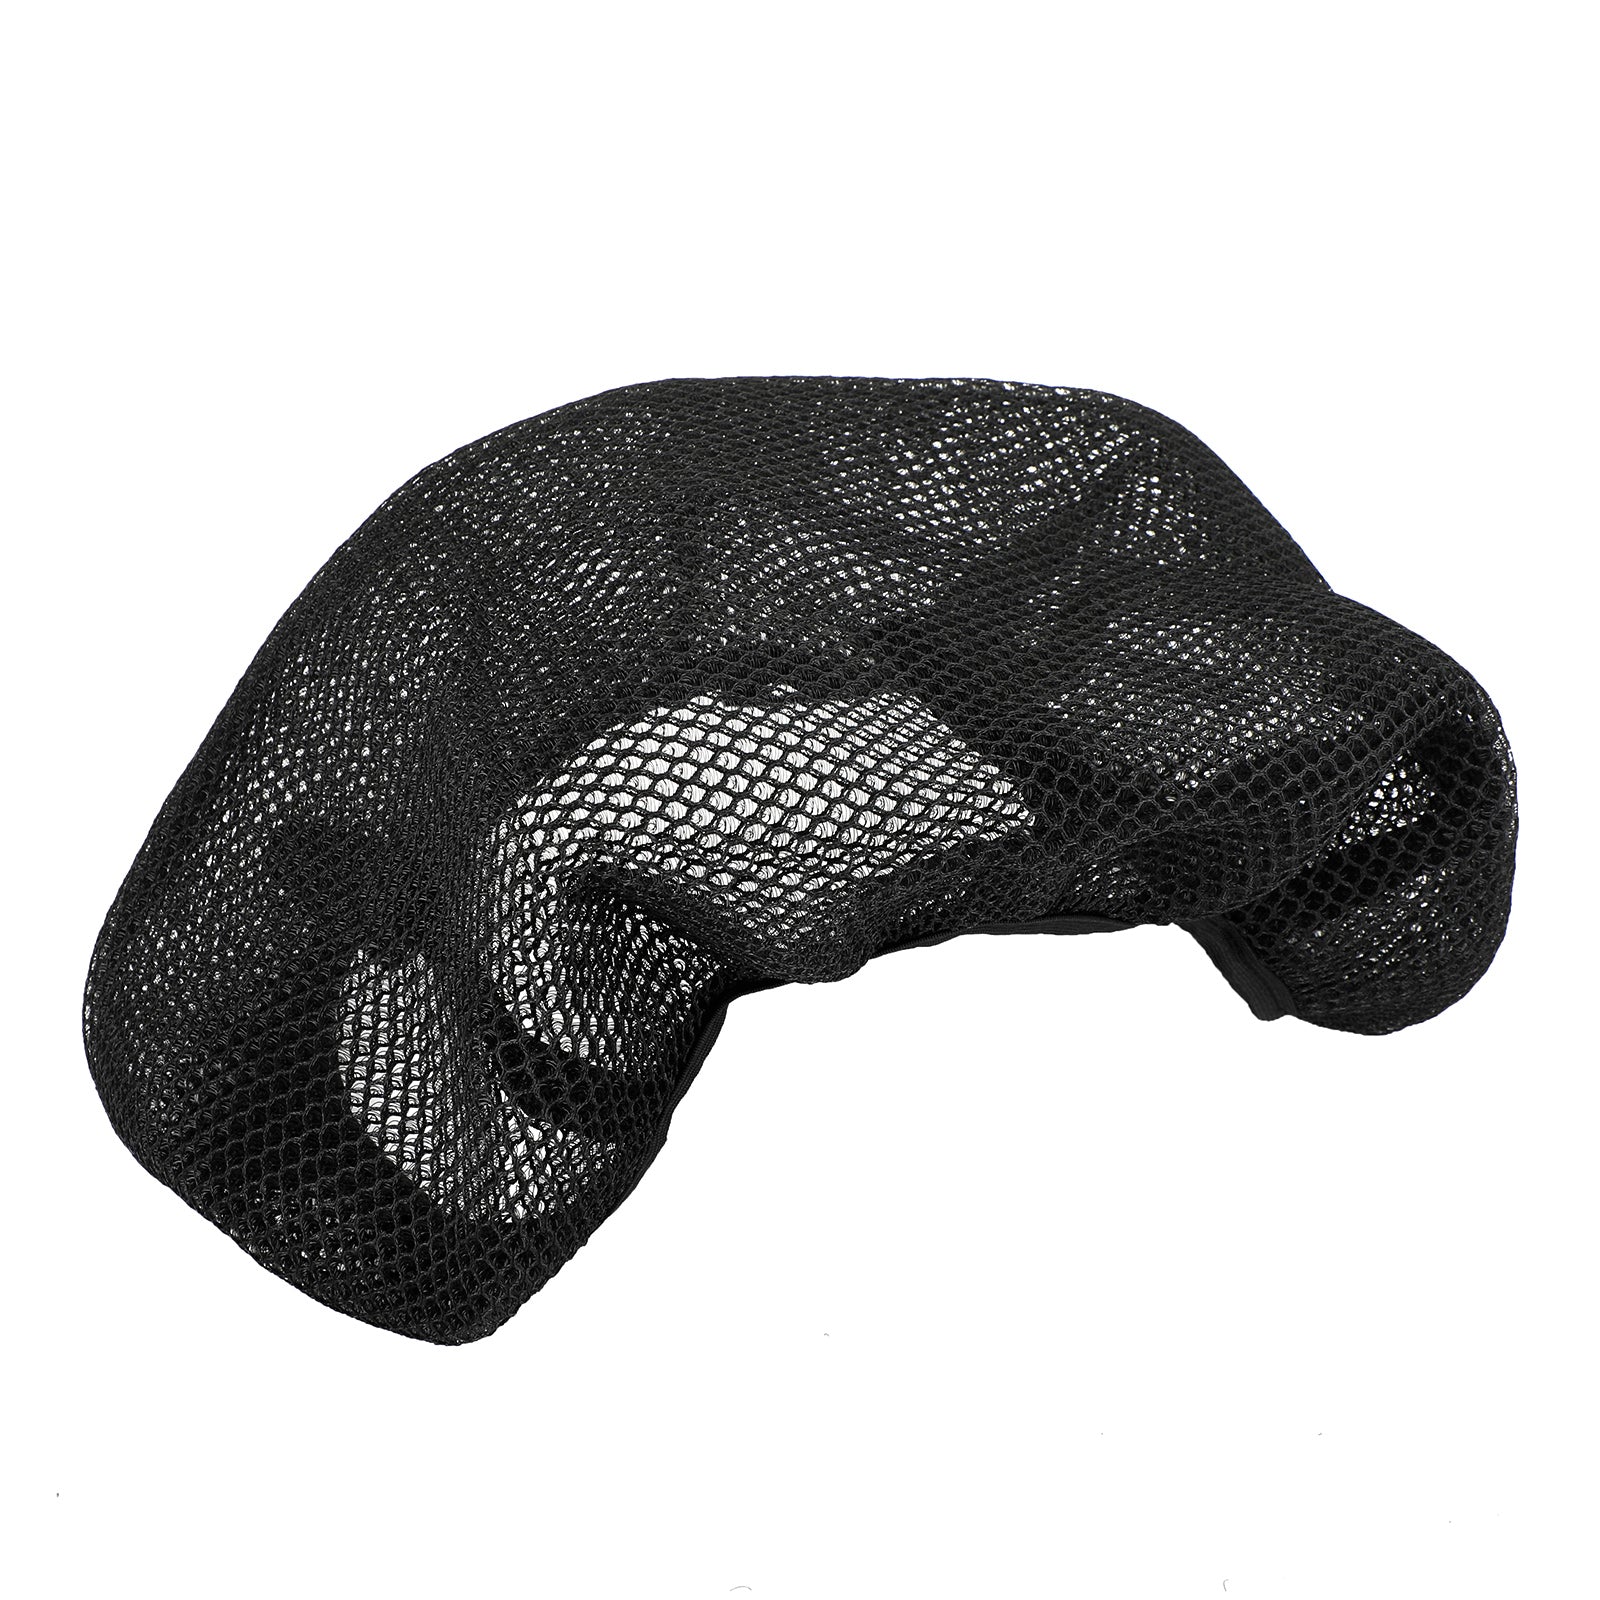 Universal Heat-Resistant Net Seat Mesh Cover For Motorcycle Scooter Motorbike XXXL